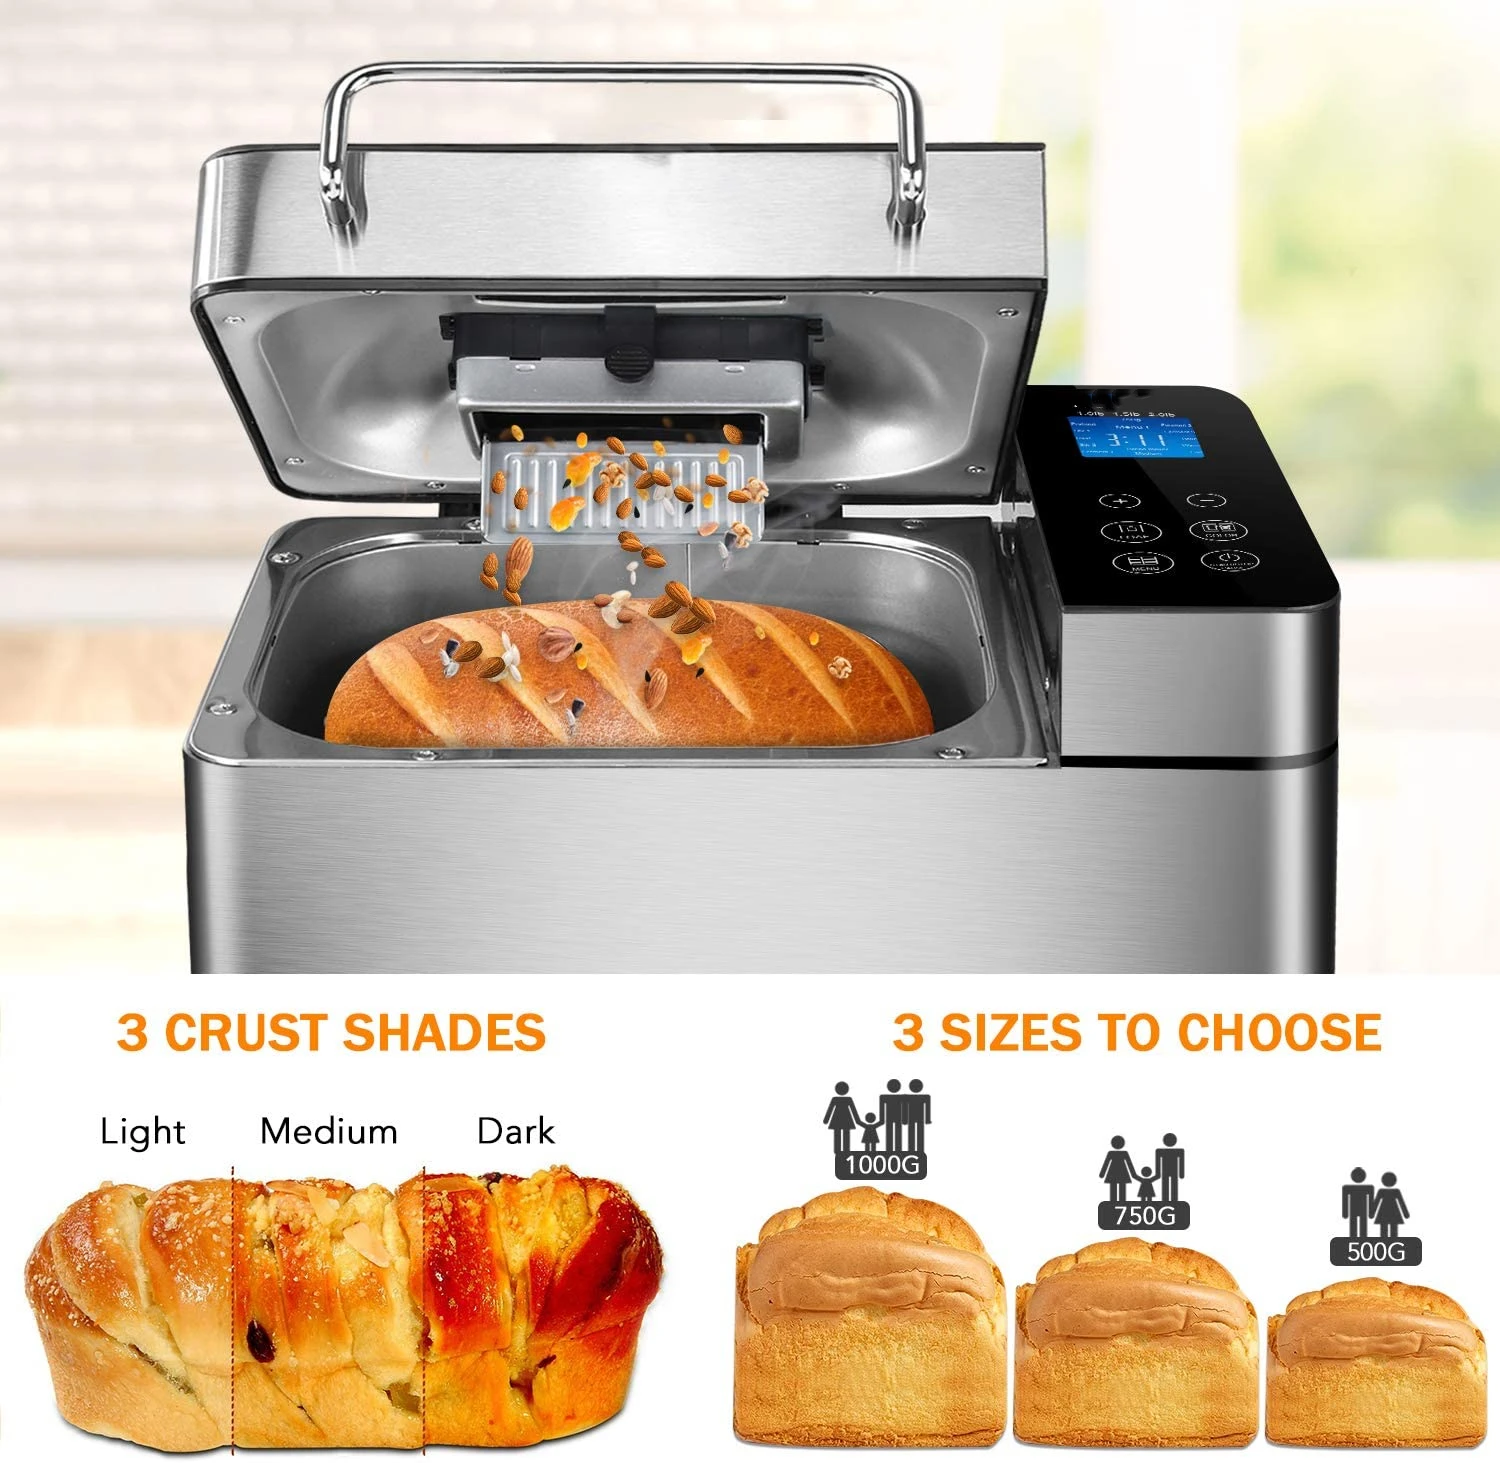 Professional Stainless Steel Household Home Full Touch Digital Electric Automatic 17-in-1 Bread Maker